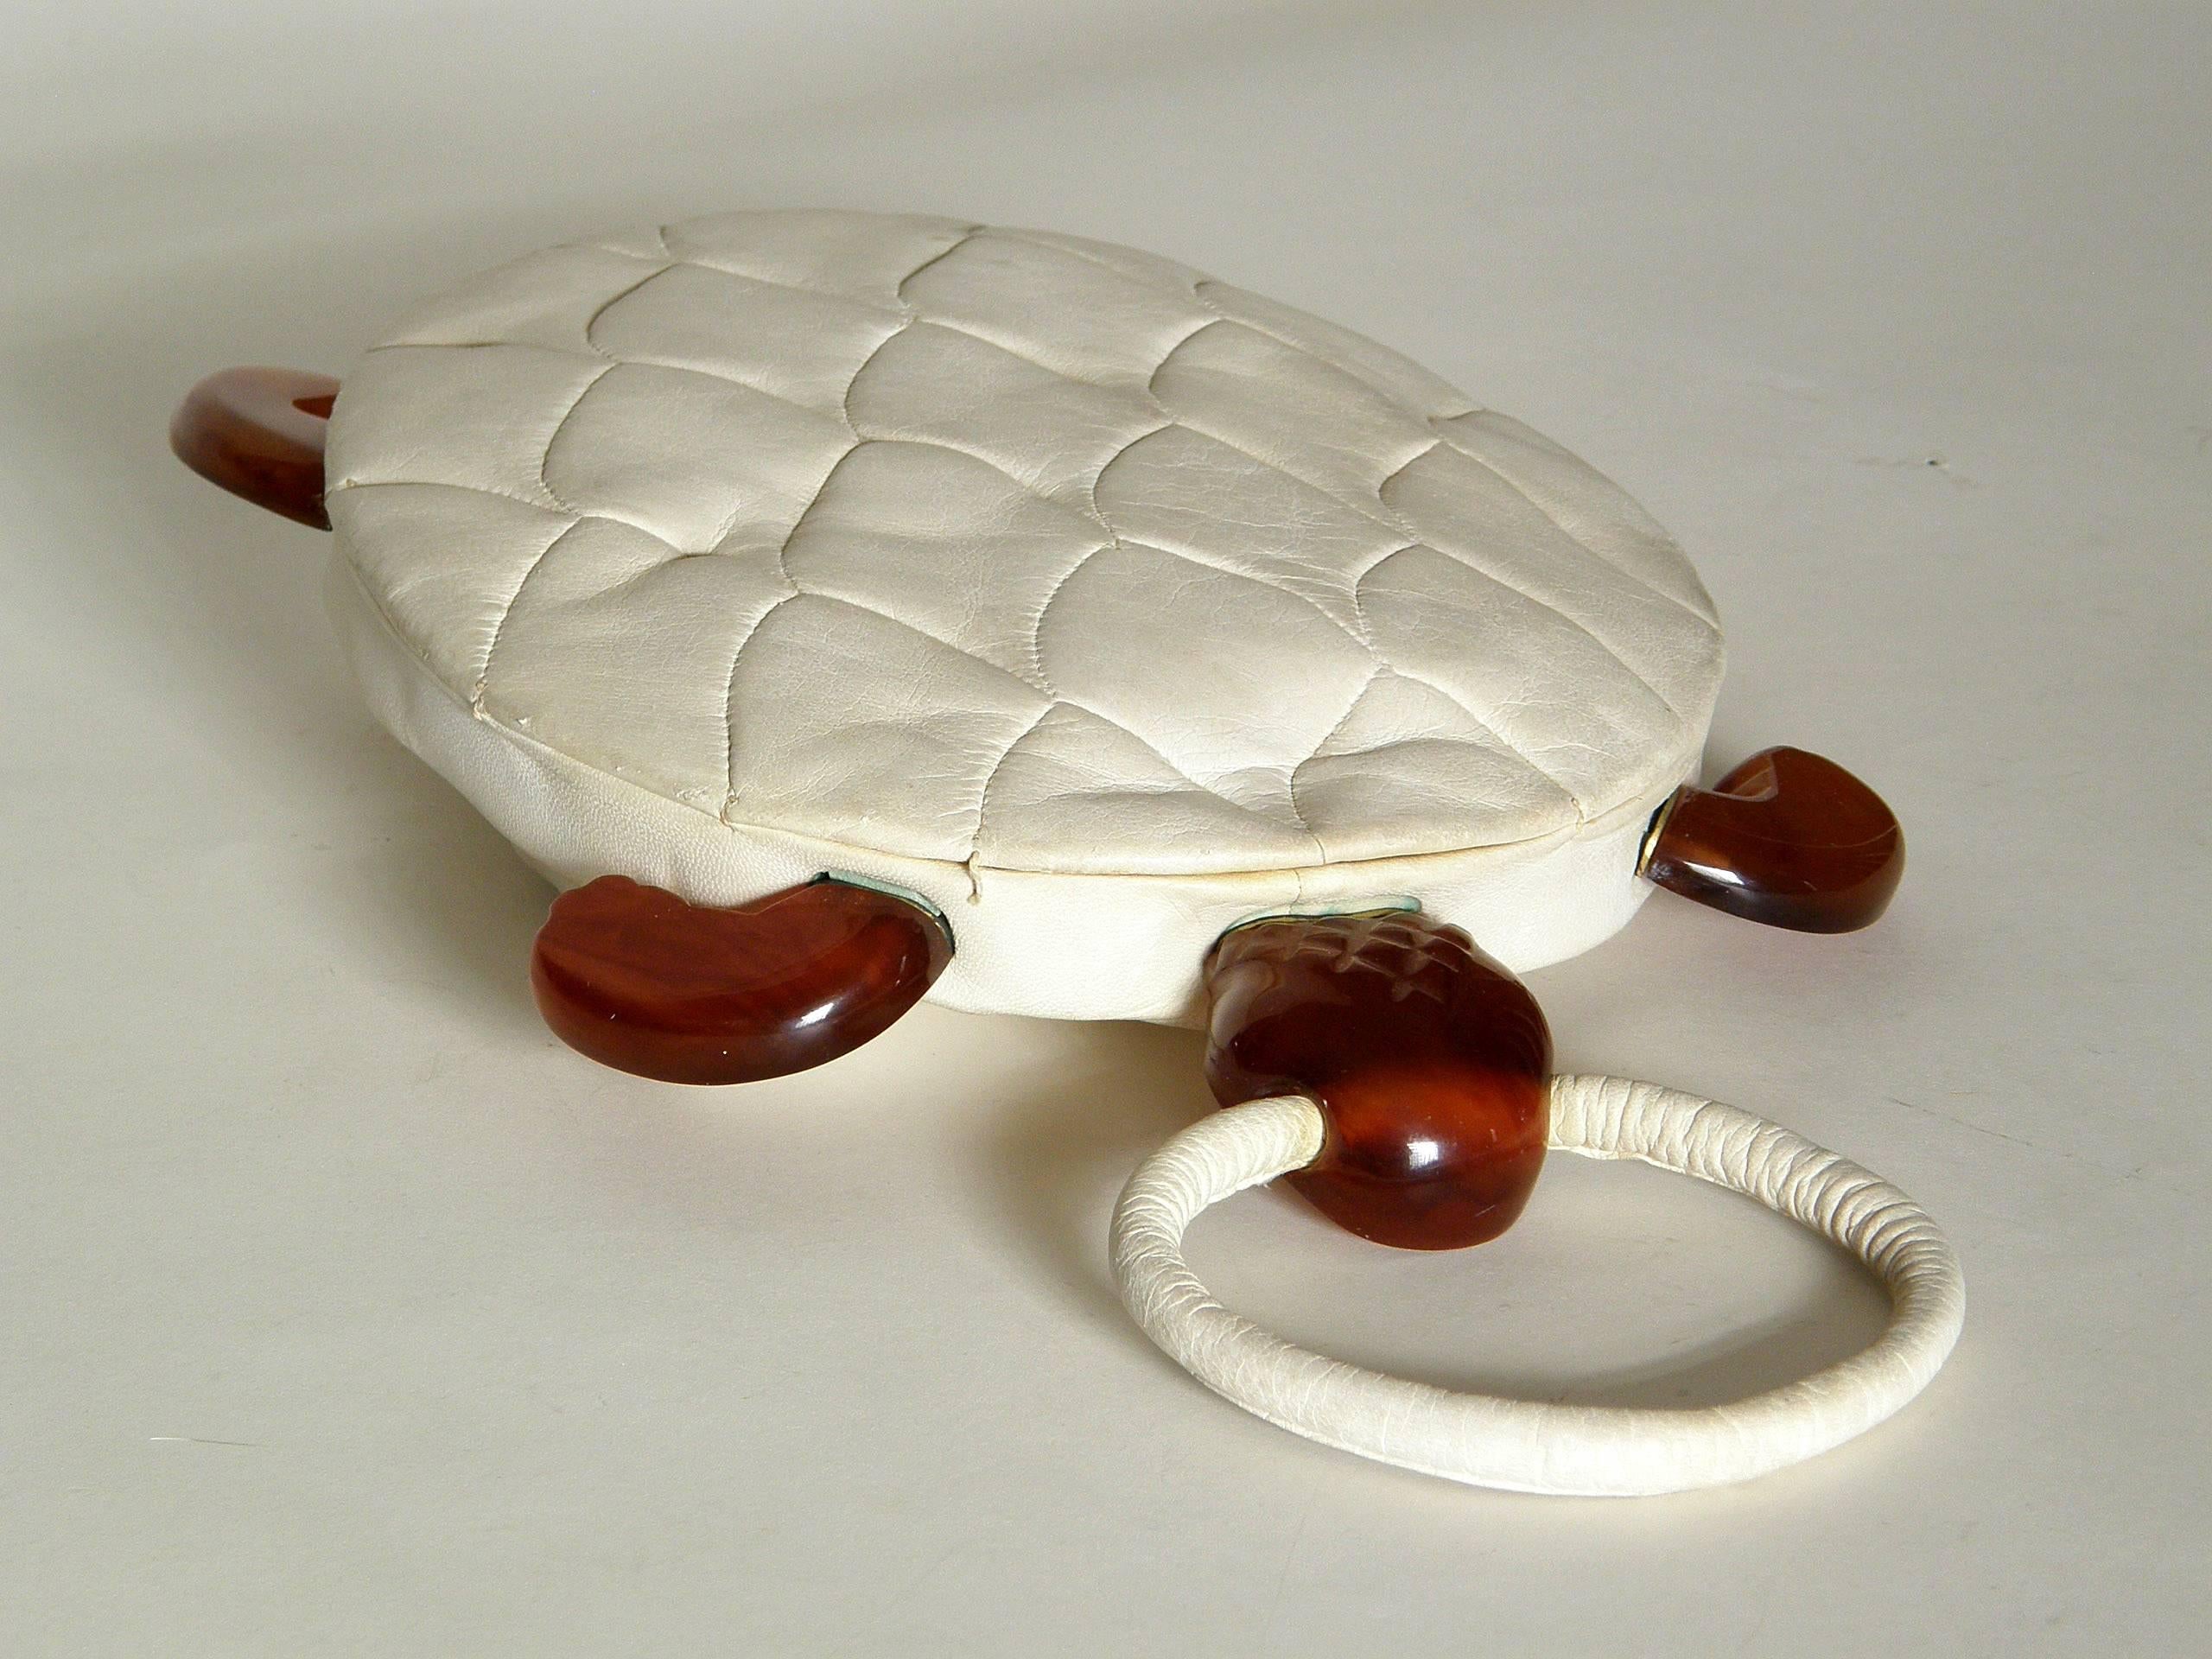 Women's Turtle Shaped Handbag in Cream Leather and Carved Bakelite 